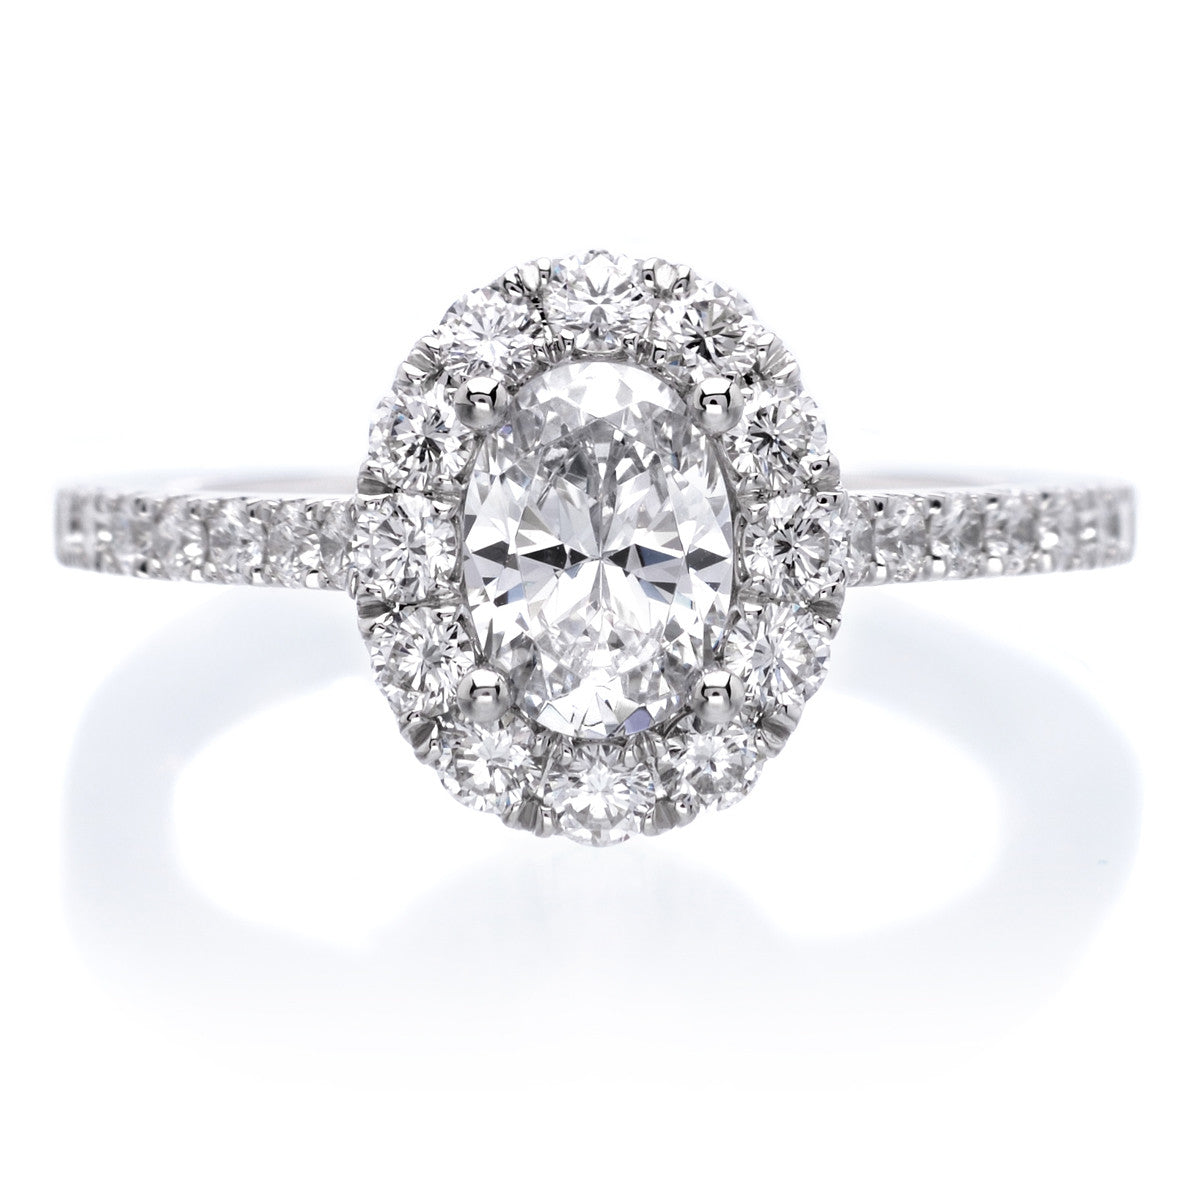 Classic Oval Halo Diamond Engagement Ring